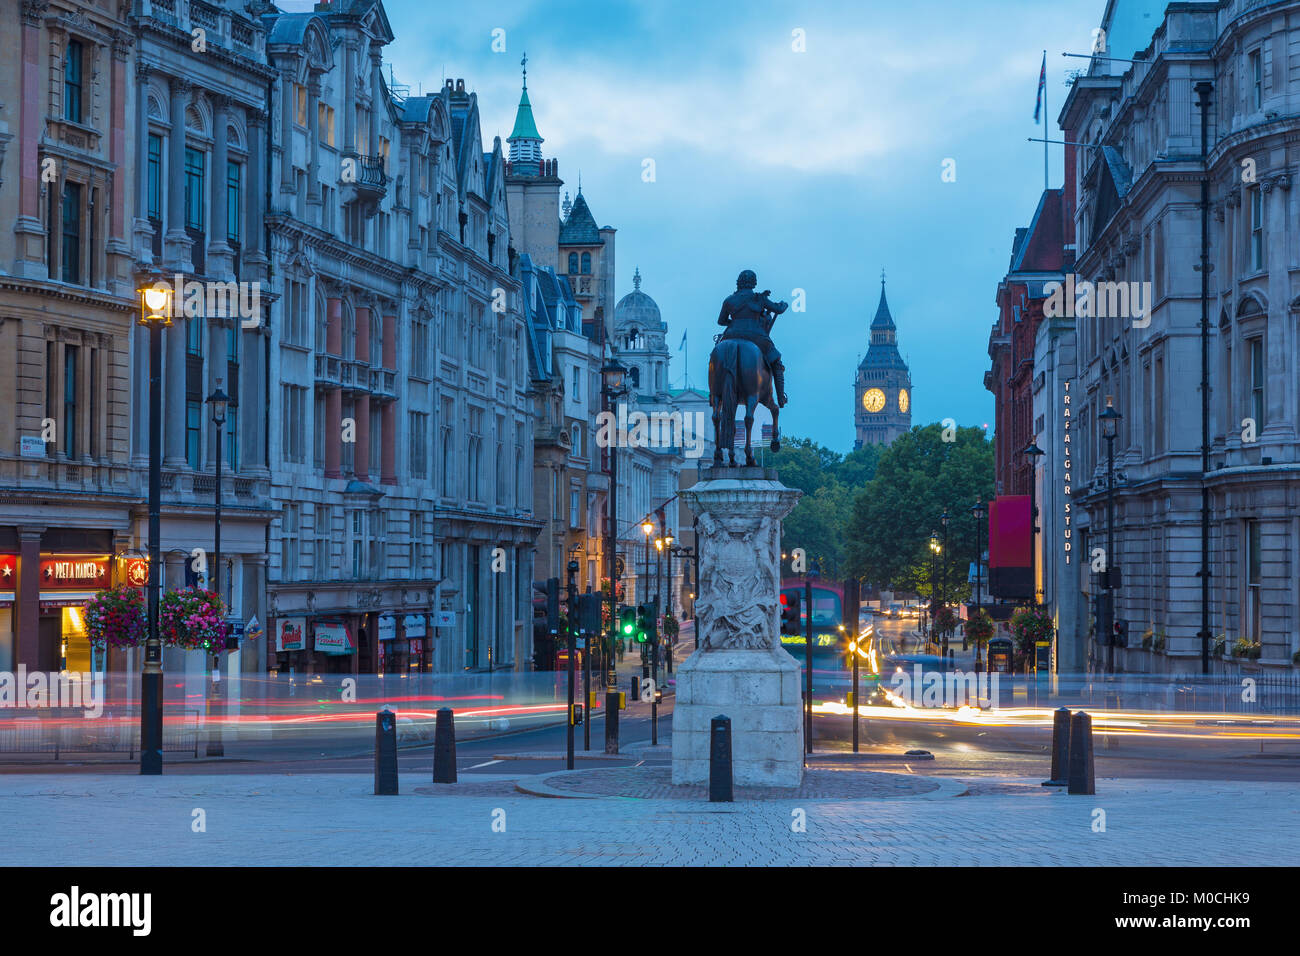 LONDON, GREAT BRITAIN - SEPTEMBER 18, 2017: The view from Trafalgar square at dusk. Stock Photo